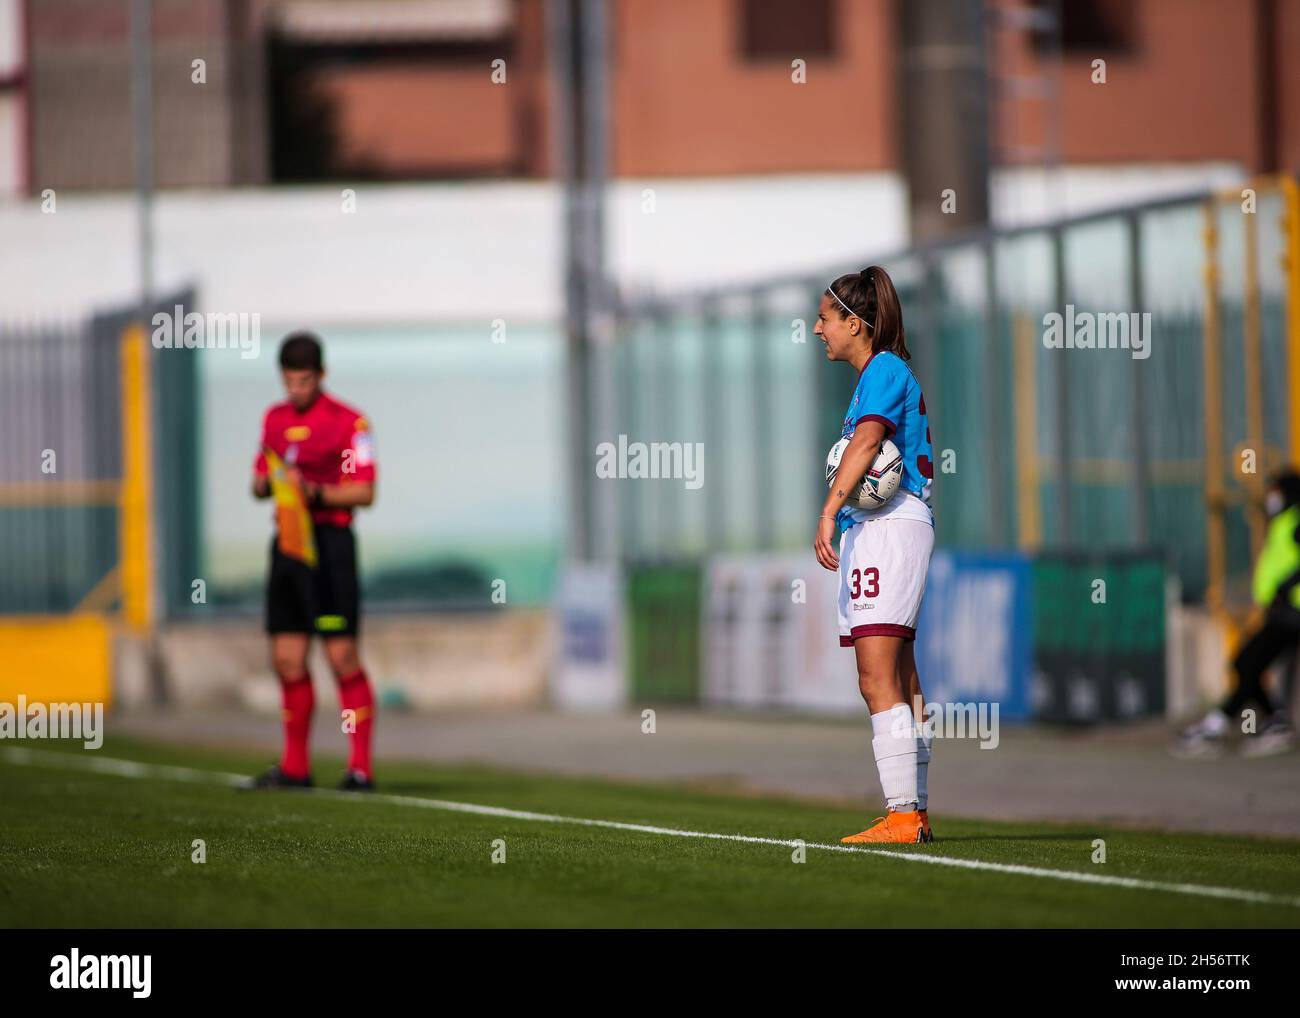 Sassuolo, Italy. 07th Nov, 2021. Sassuolo, Italy, November 7 2021 Fusini Martina (33 Pomigliano CF) in action during the Serie A Femminile game between Sassuolo and Pomigliano at Stadio Enzo Ricci in Sassuolo, Italy Michele Finessi/SPP Credit: SPP Sport Press Photo. /Alamy Live News Stock Photo